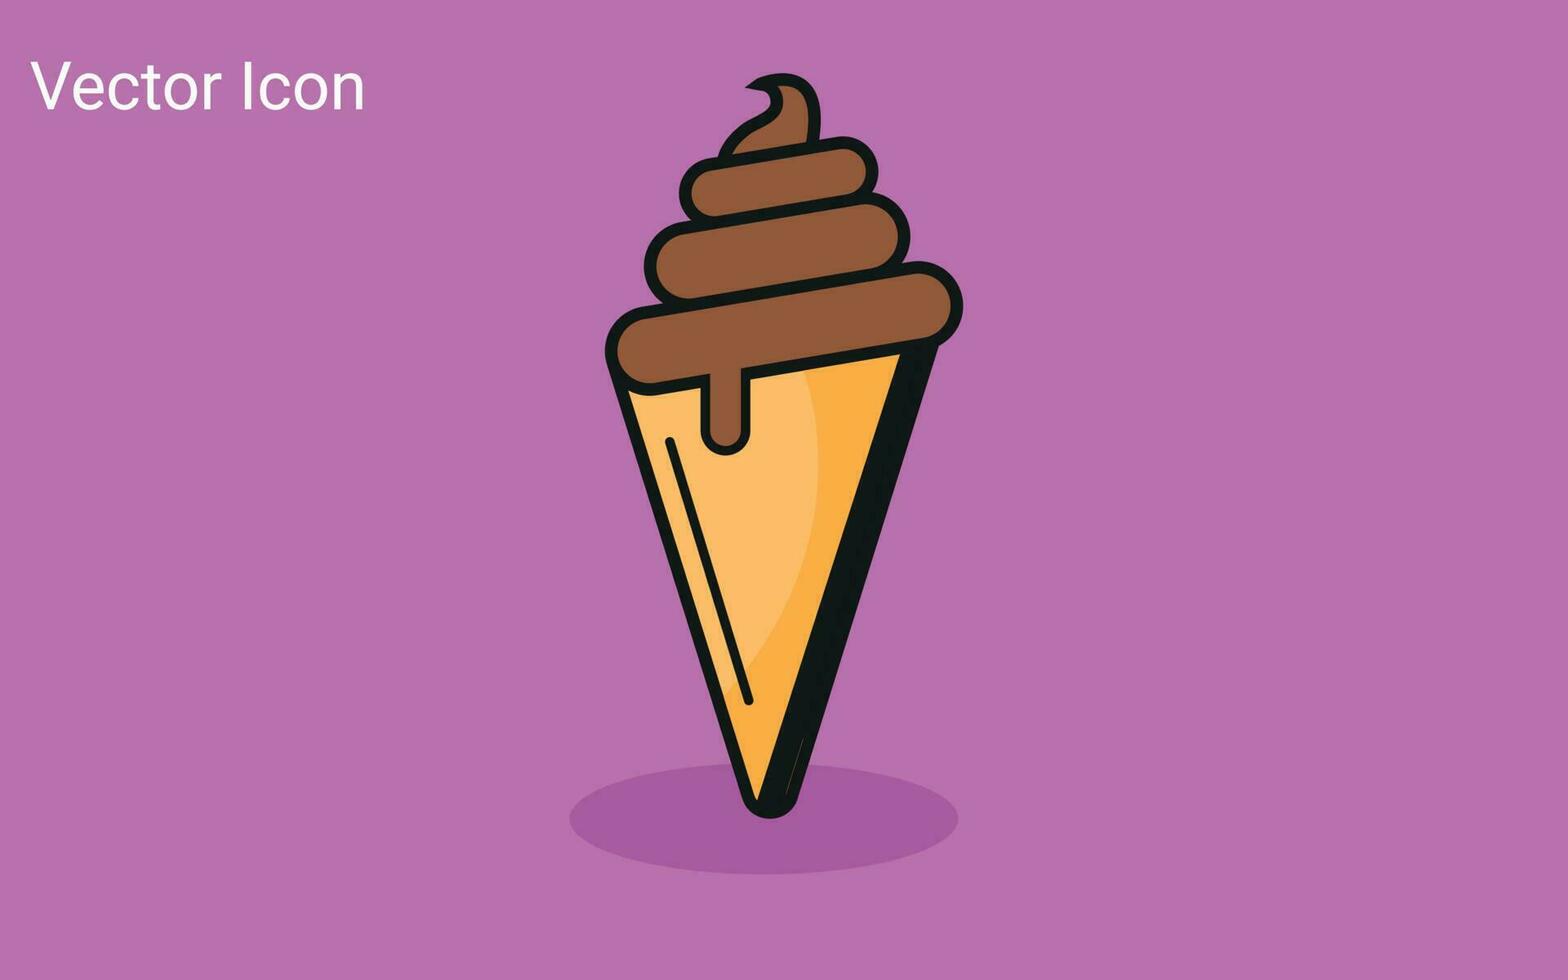 Melting ice cream balls in the waffle cone isolated on pink background. Vector flat outline icon. Comic character in cartoon style illustration for t shirt design